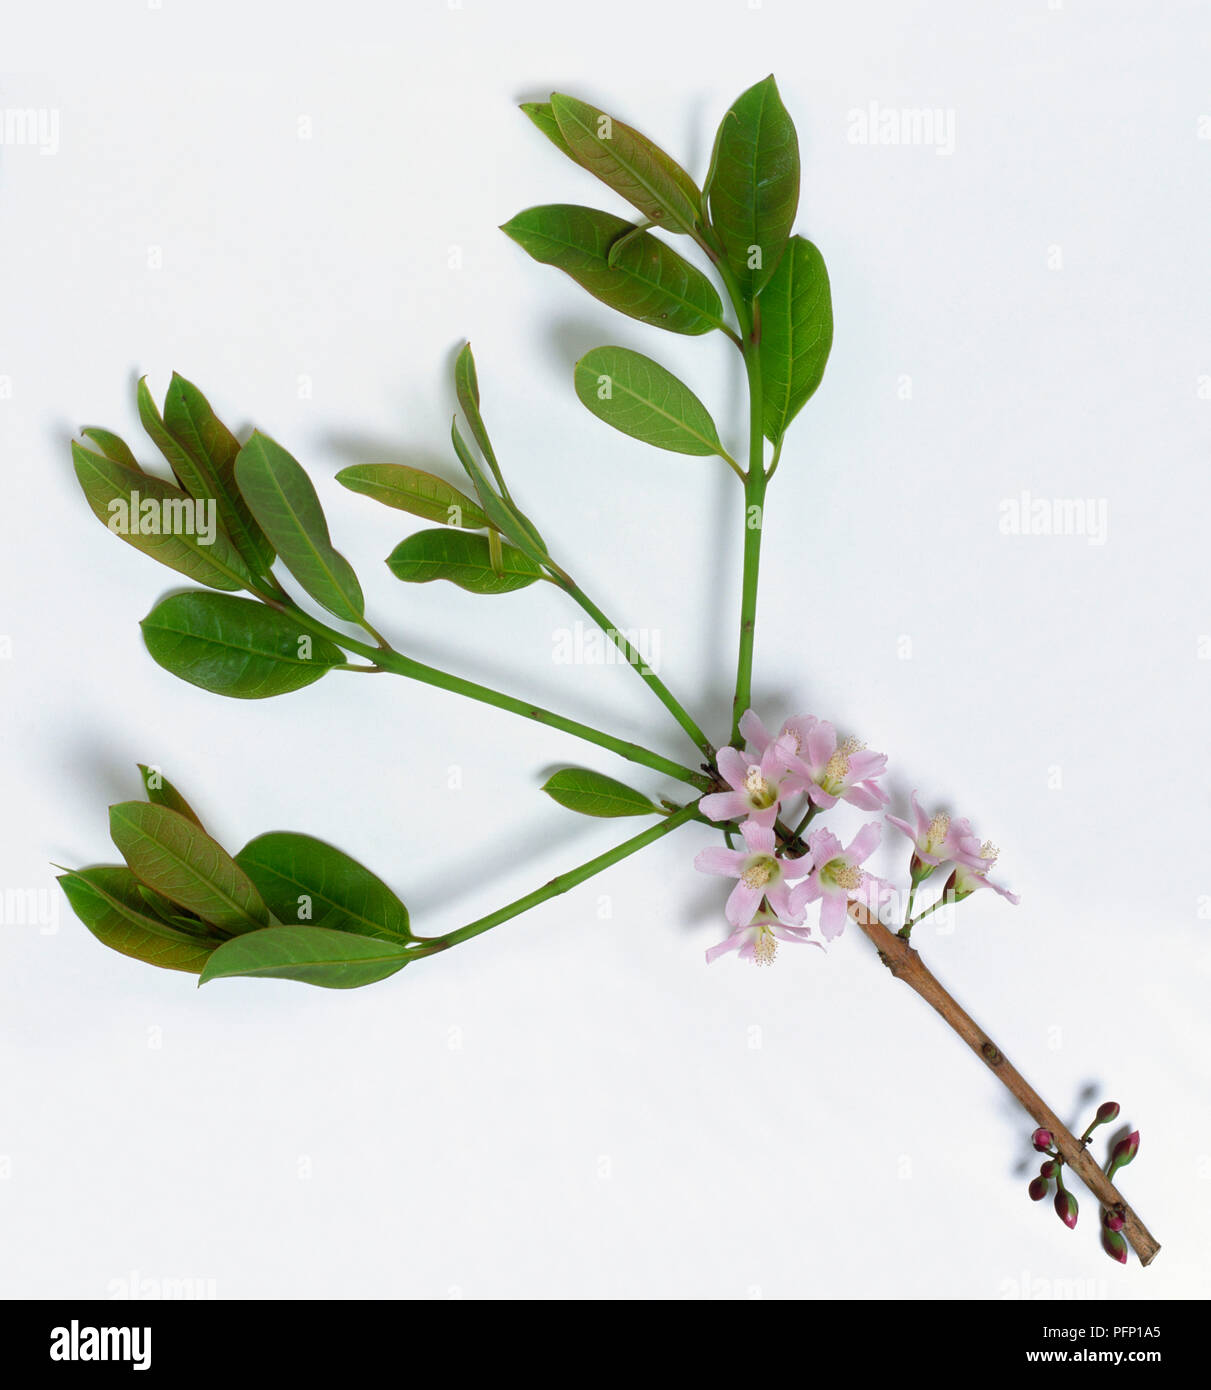 Cratoxylum formosum, Pink Mempat tree, branch with green leaf clusters and fragrant pink blossom. Stock Photo